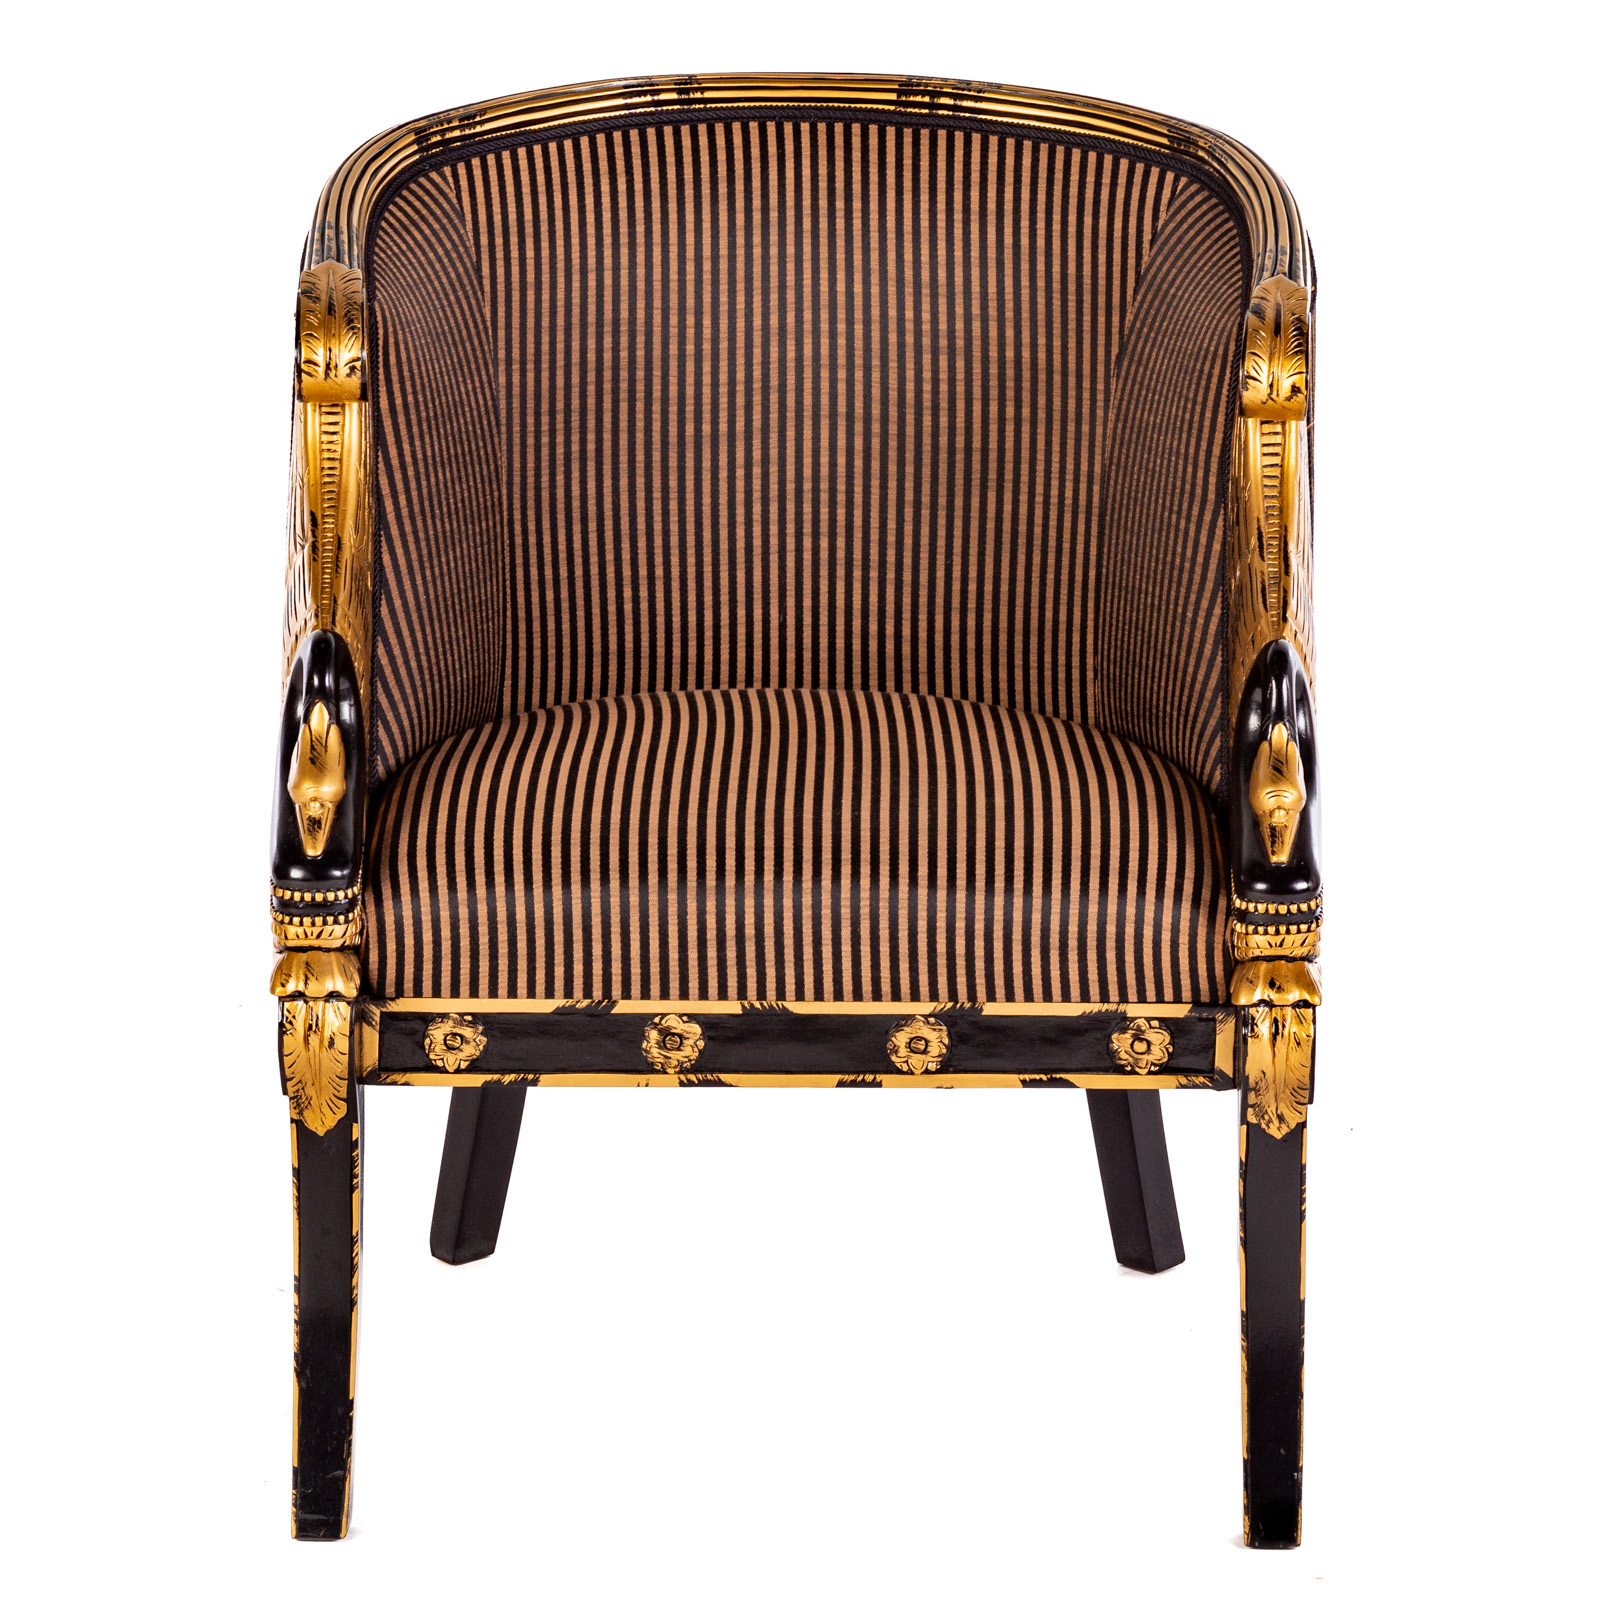 FRENCH EMPIRE STYLE TUB CHAIR 20th 29e92f